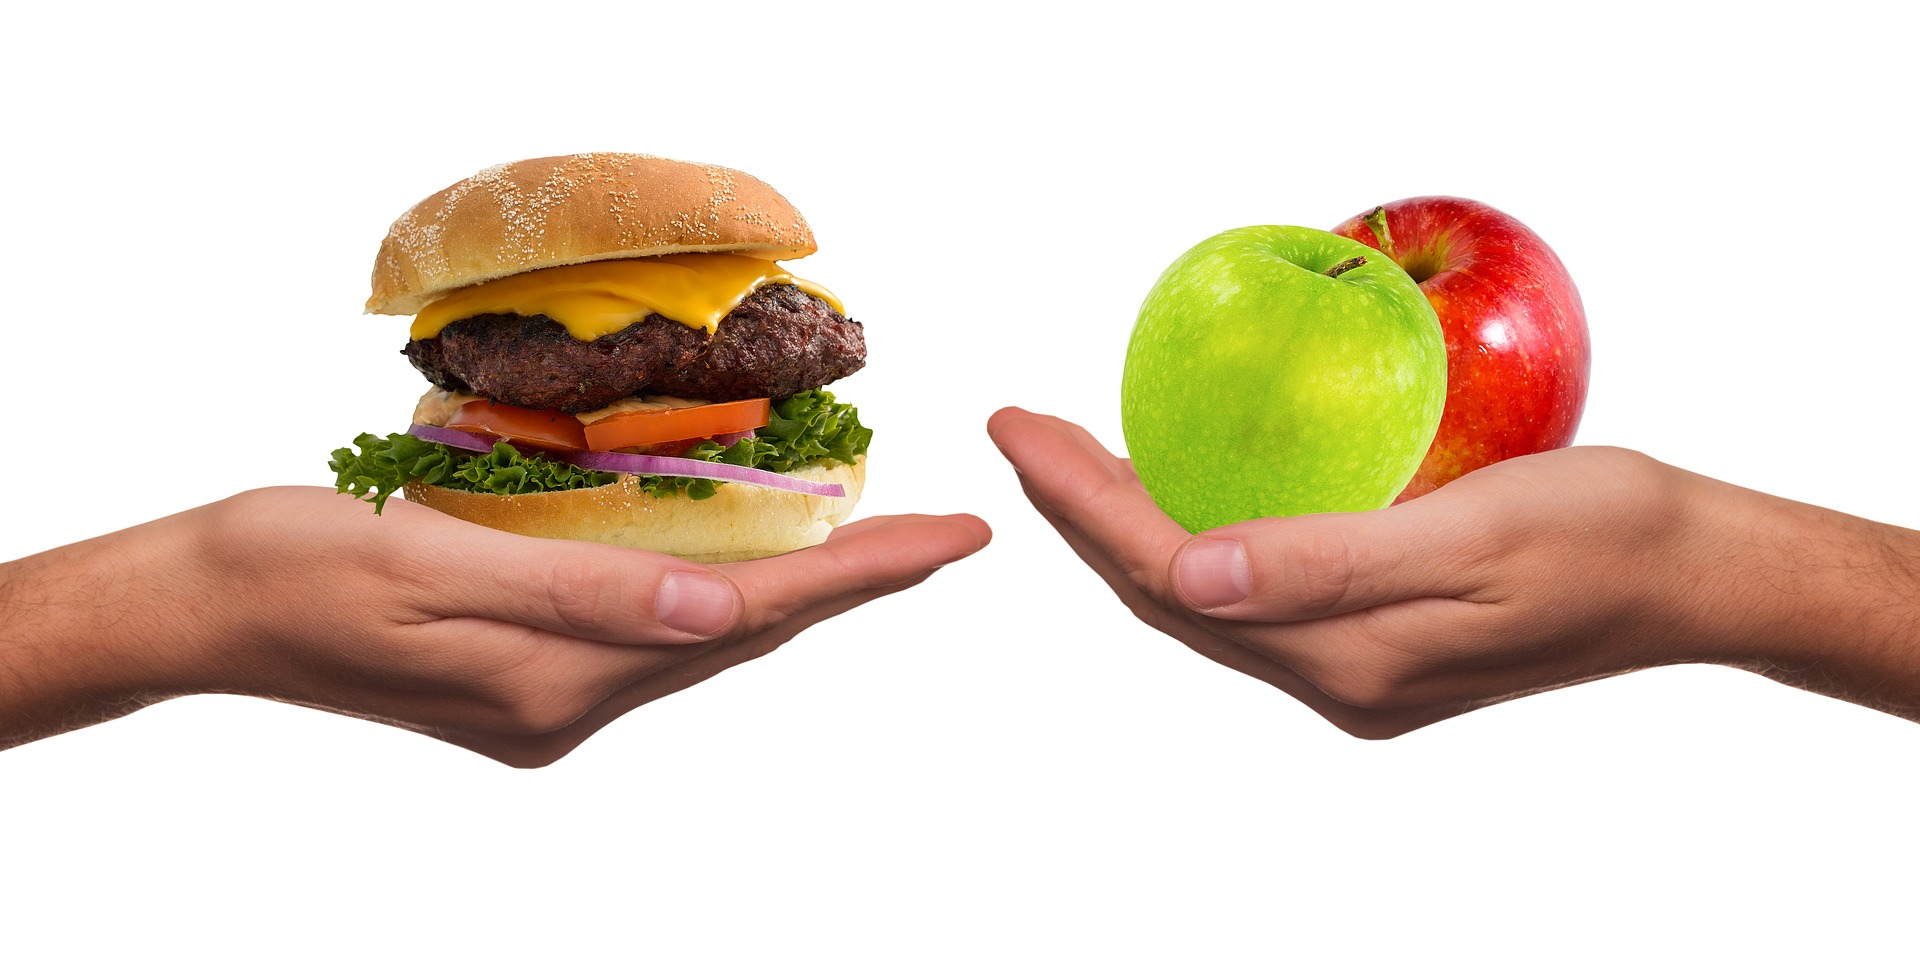 A burger and an apple, are you hungry